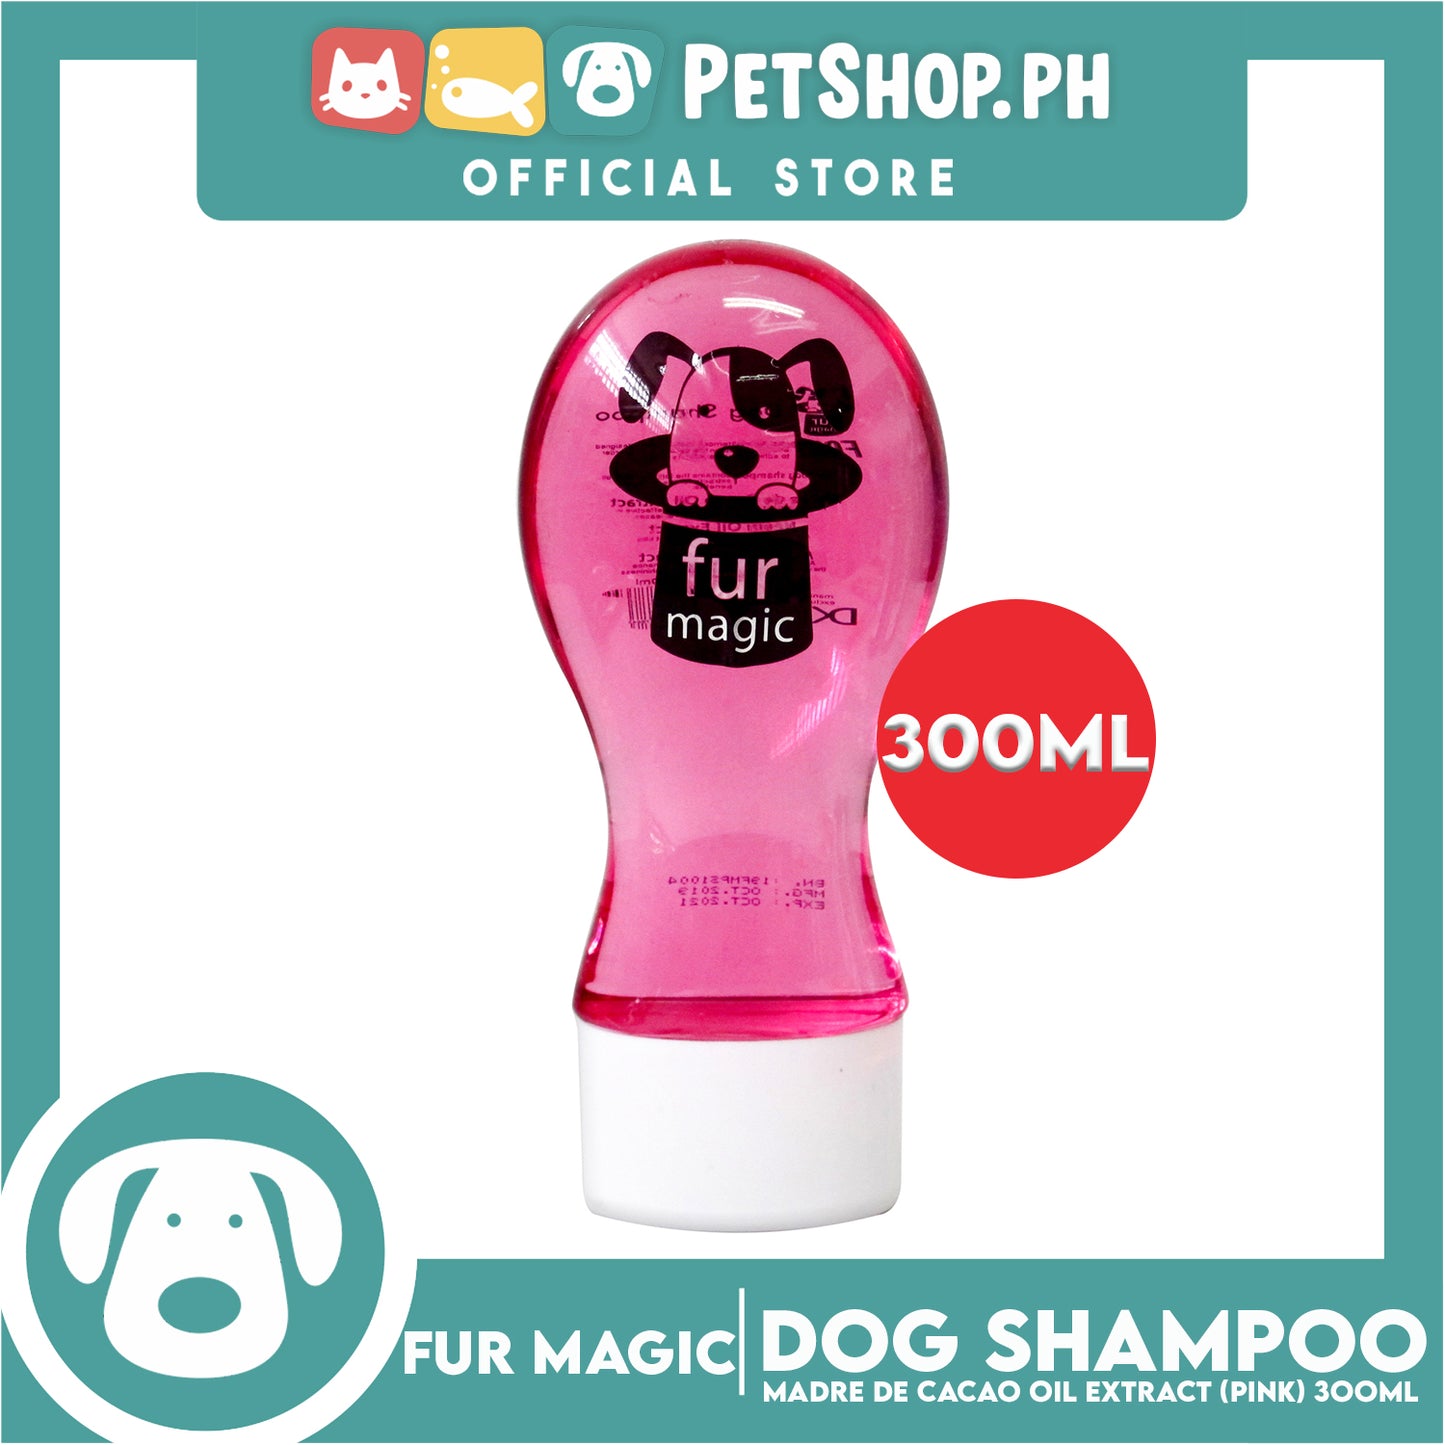 Fur magic with Fast Acting Stemcell Technology (Pink) 300ml Dog Shampoo